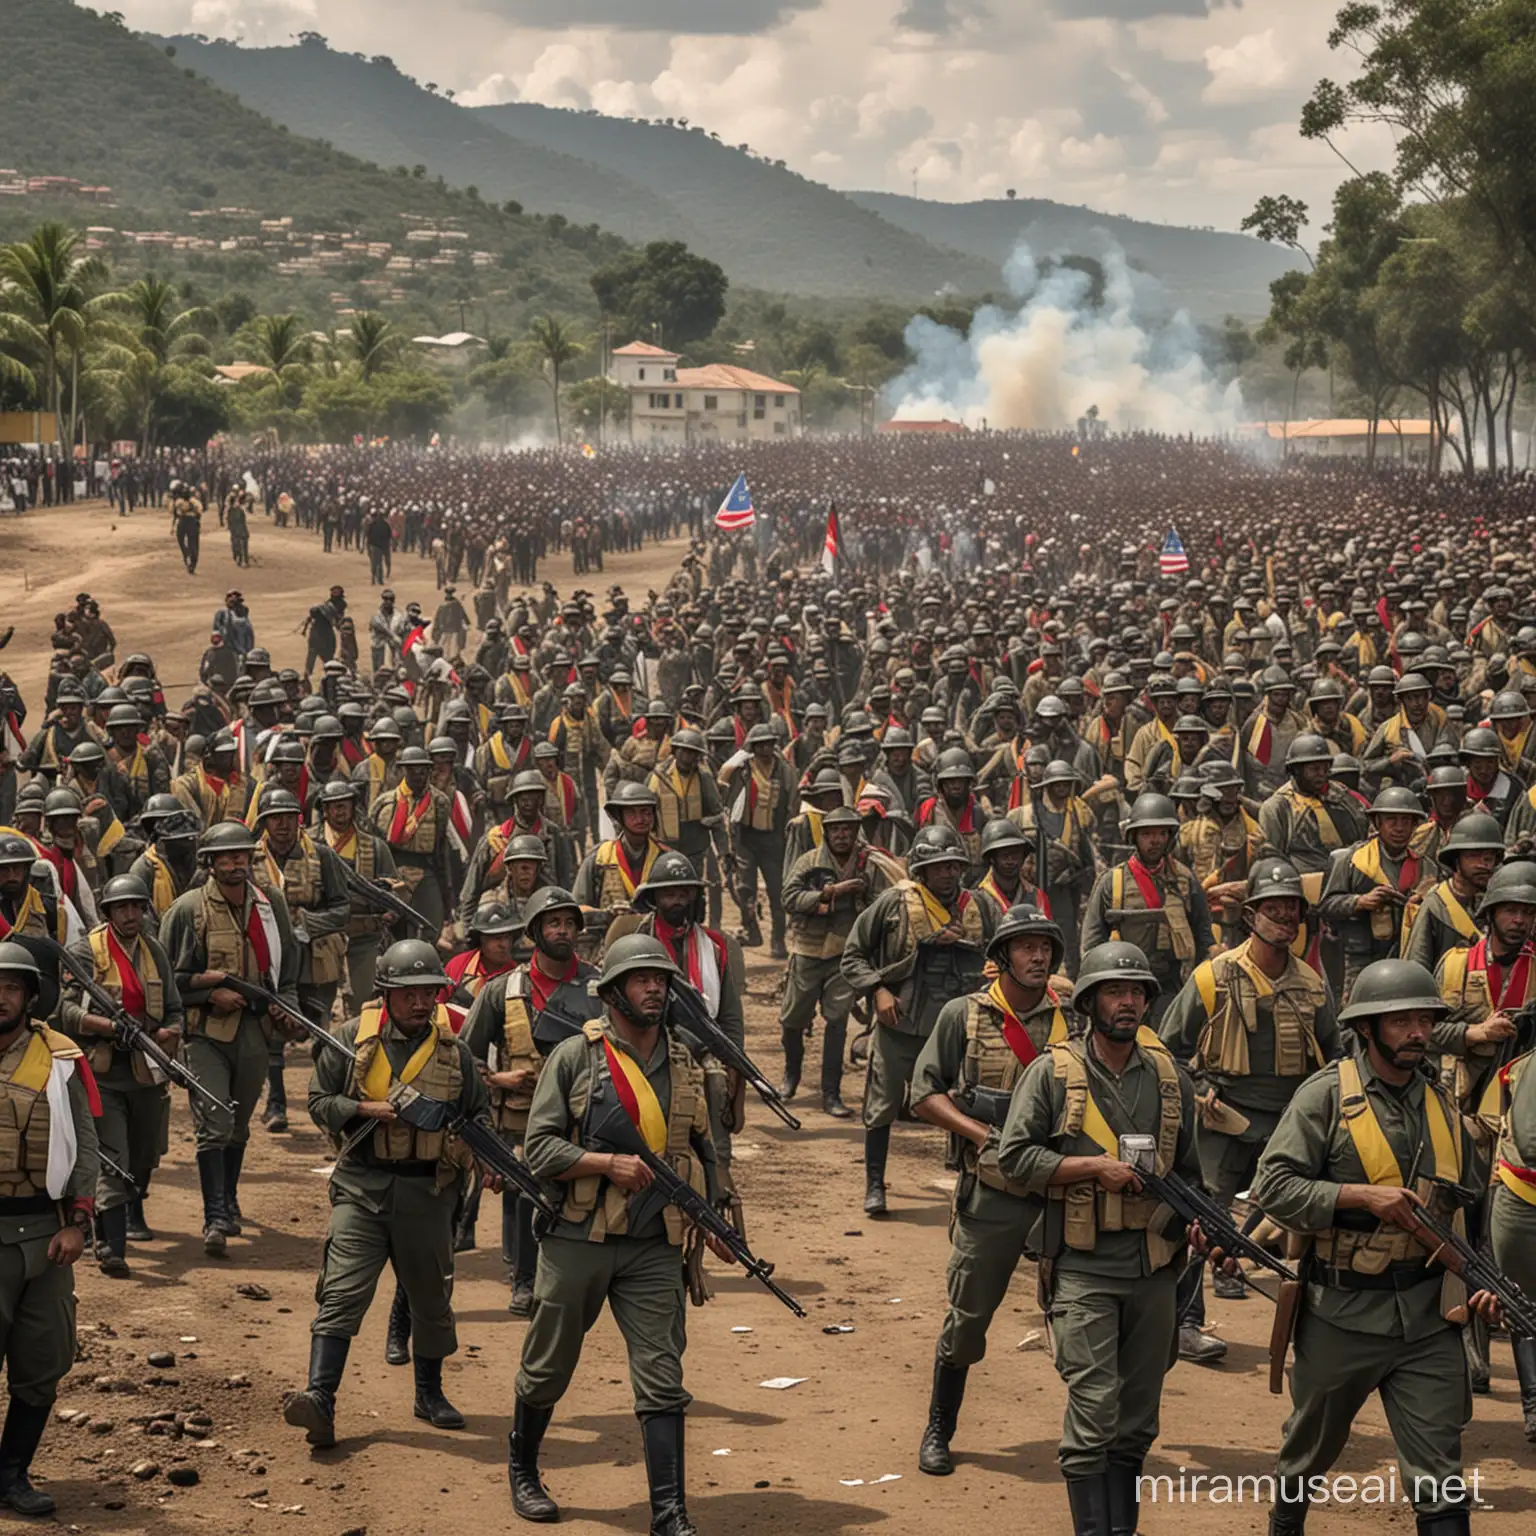 US Military Forces Engaging in a Tactical Operation in Venezuela